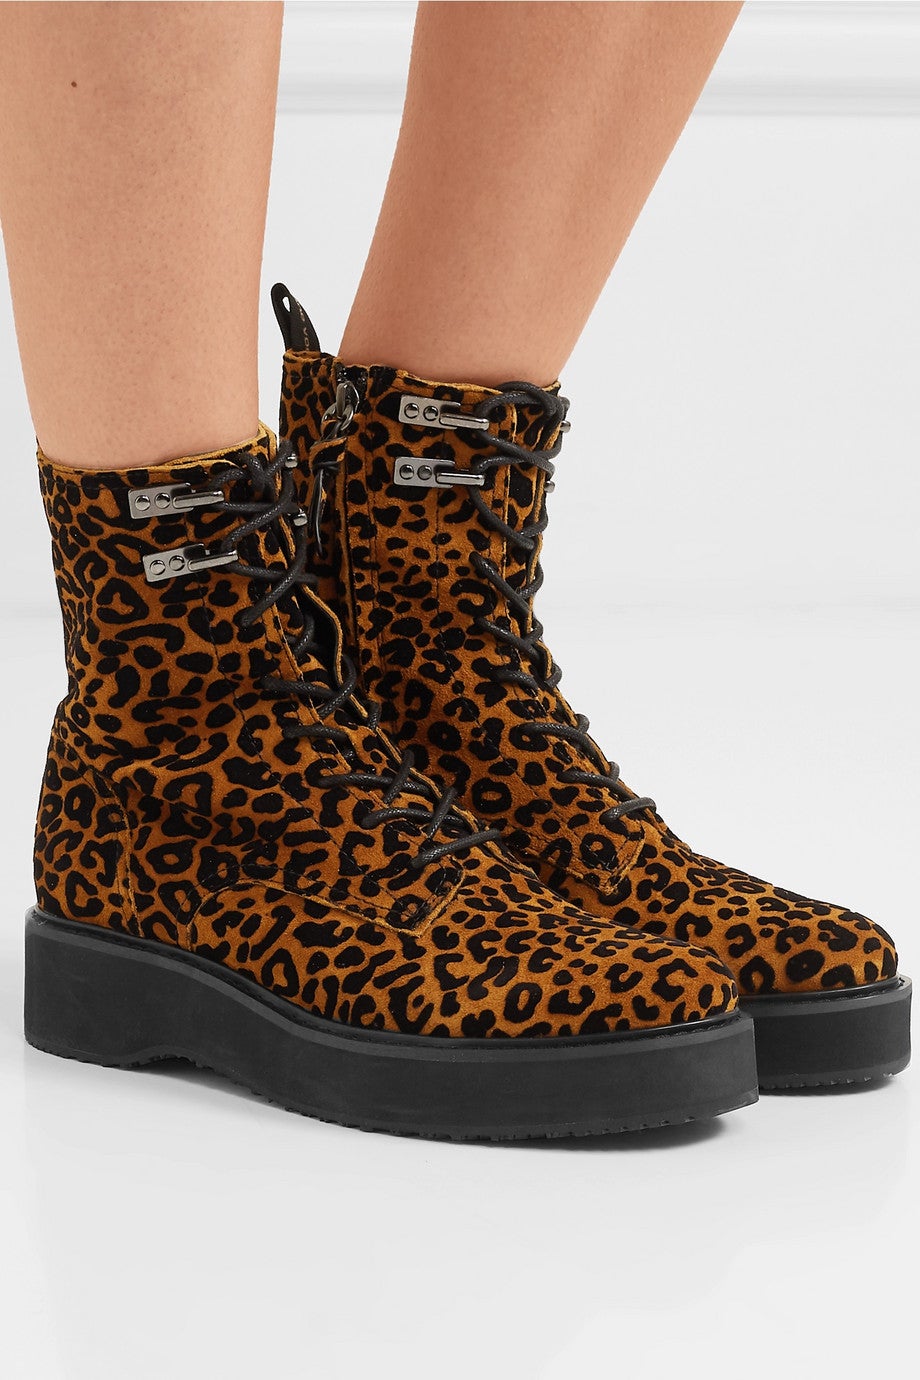 In Charge Leopard-Print Ankle Boots